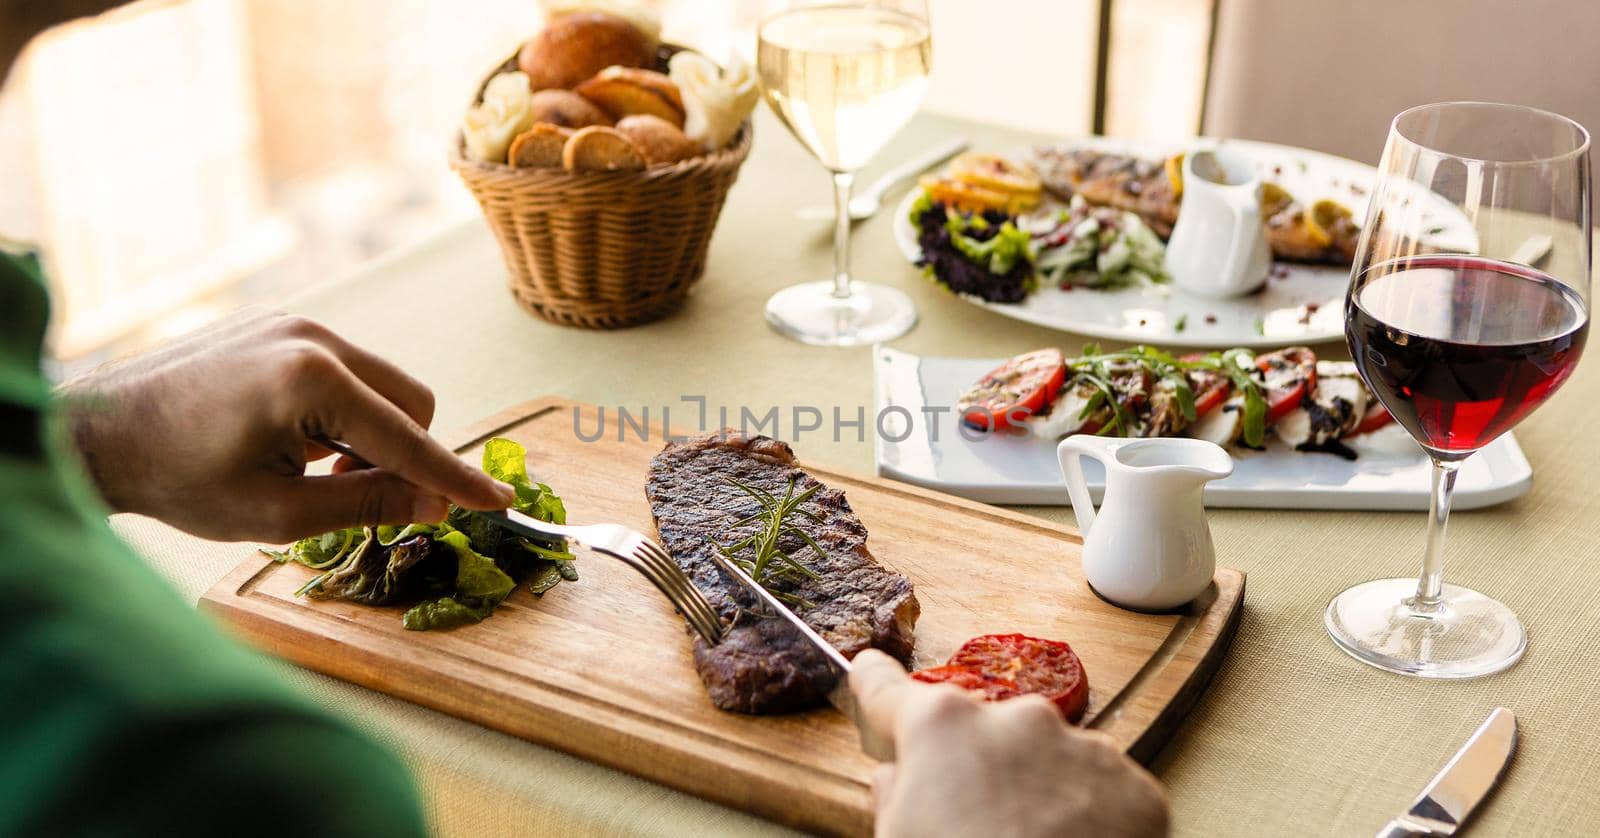 Man cutting tasty steak with sauce, salad on the table